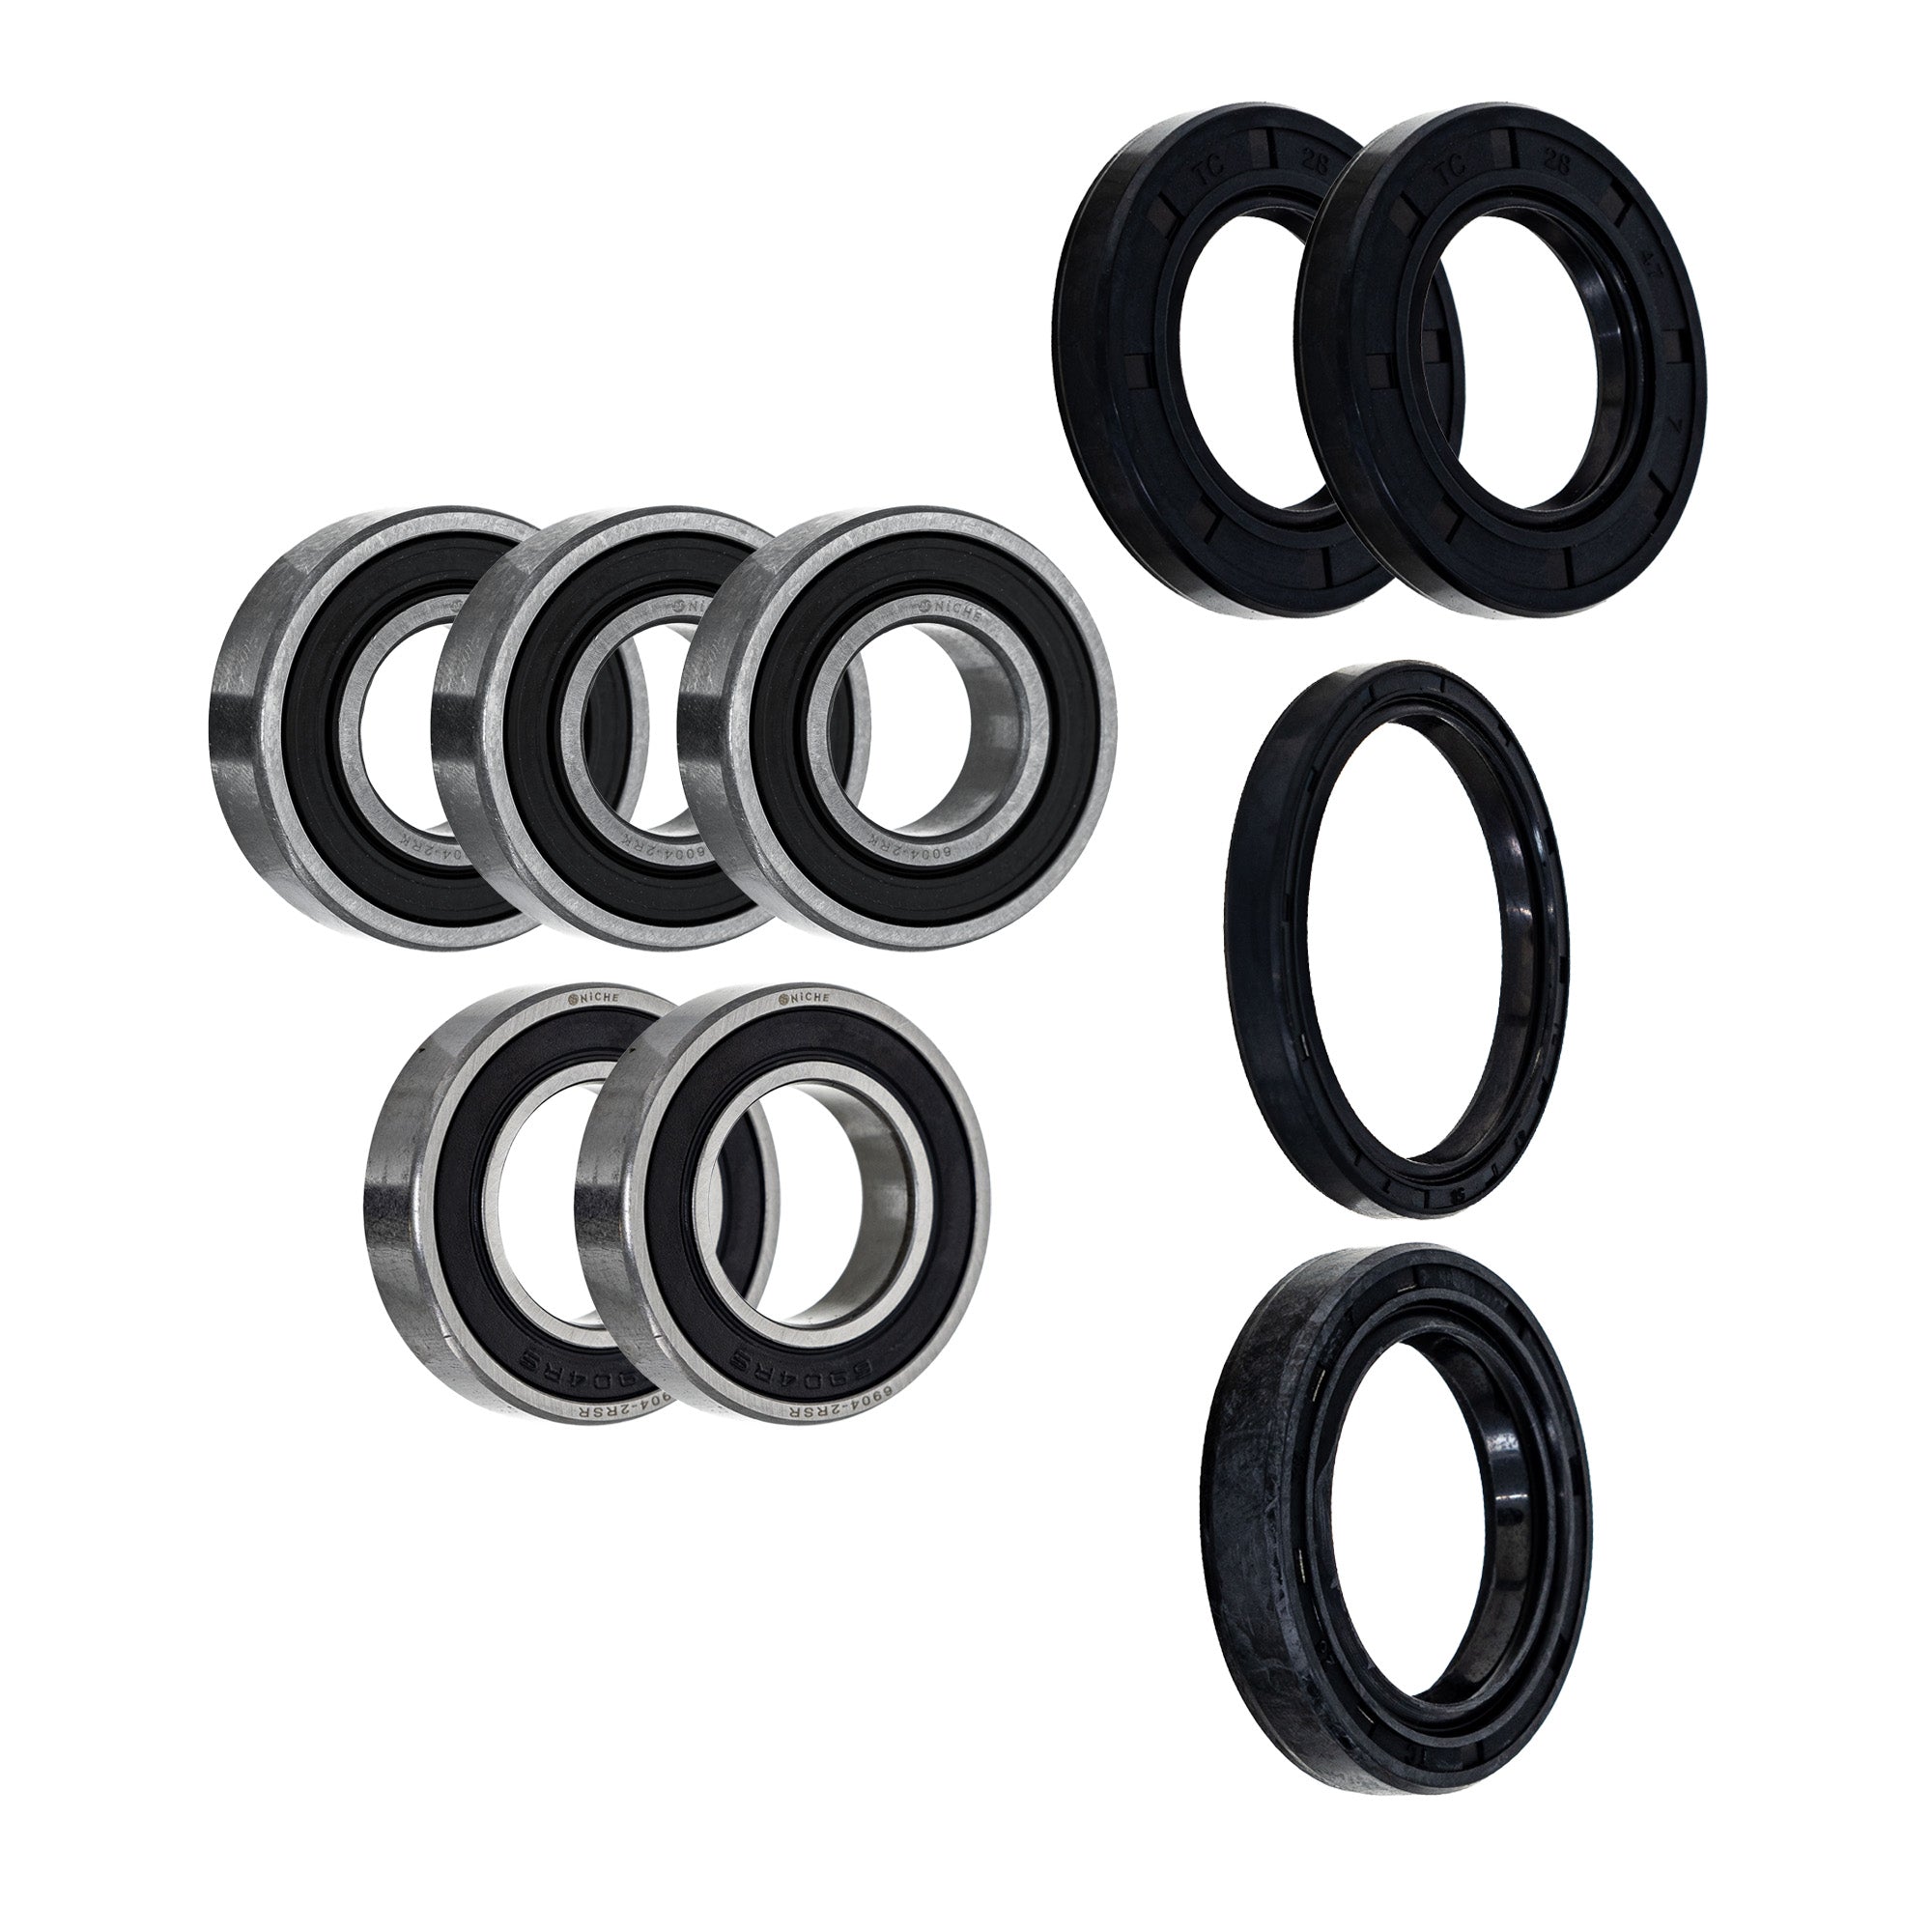 Wheel Bearing Seal Kit for zOTHER WR400F NICHE MK1008723